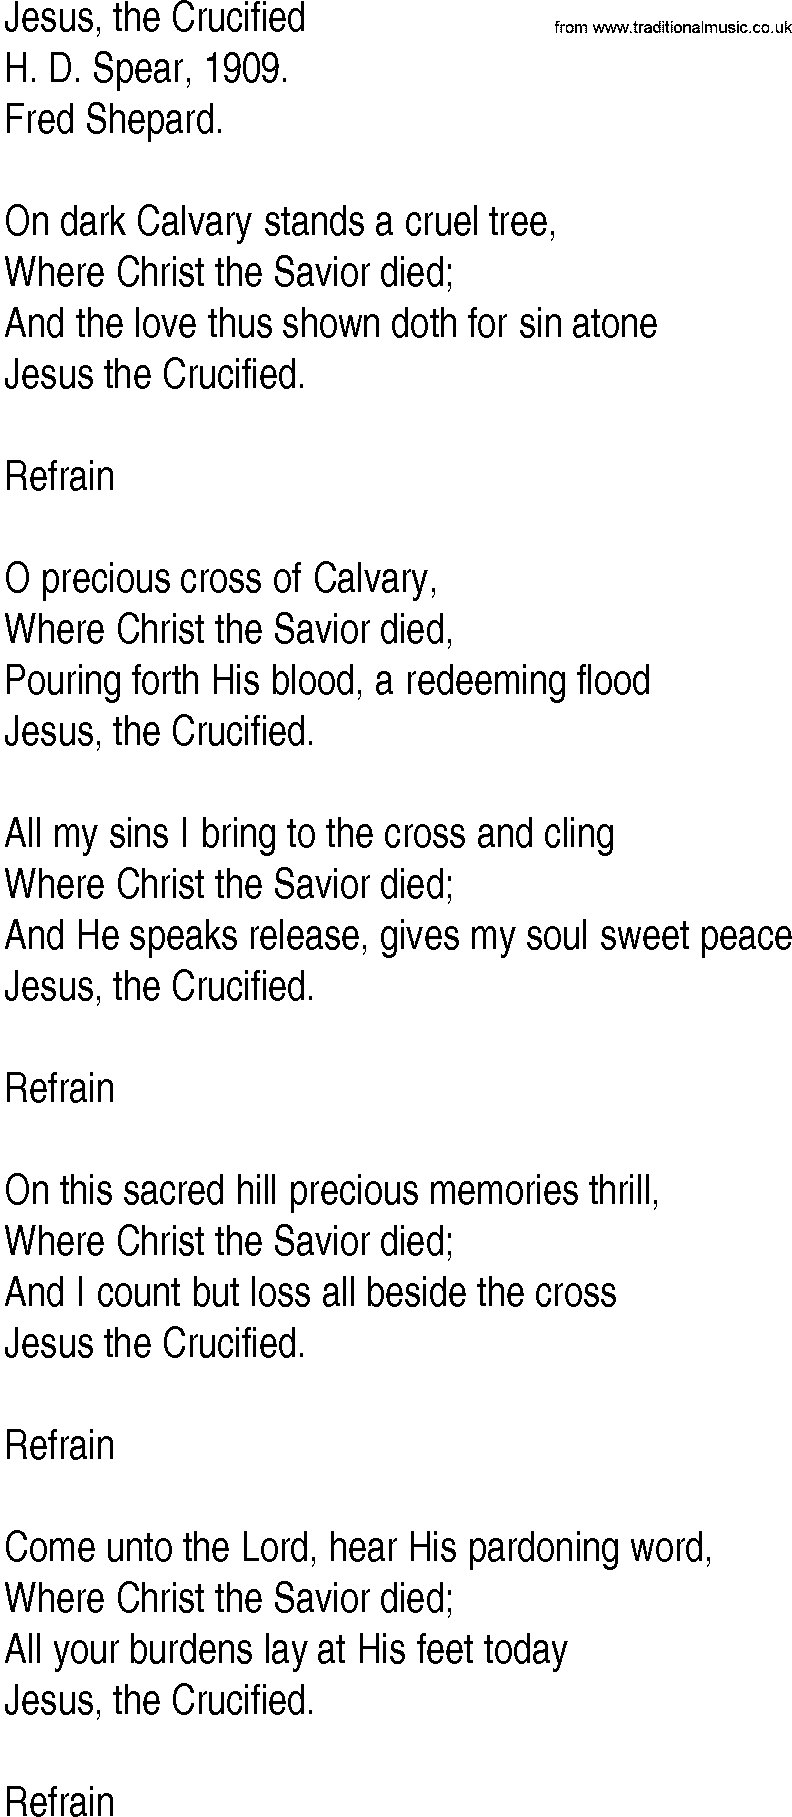 Hymn and Gospel Song: Jesus, the Crucified by H D Spear lyrics